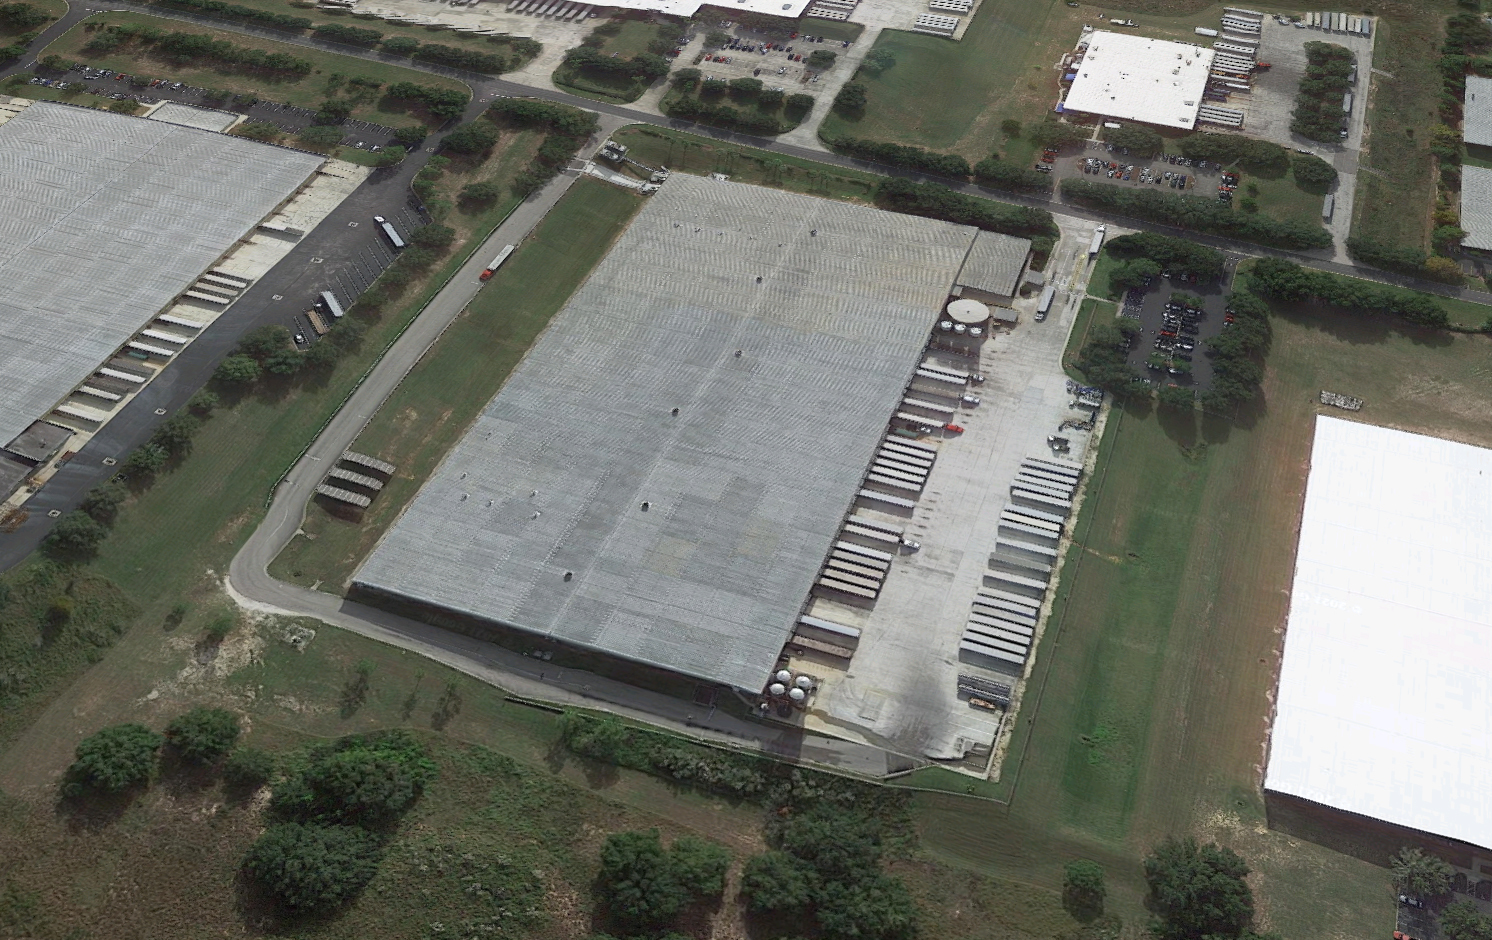 An aerial view of the Niagara Bottling facility in Groveland, about 30 miles west of Orlando.